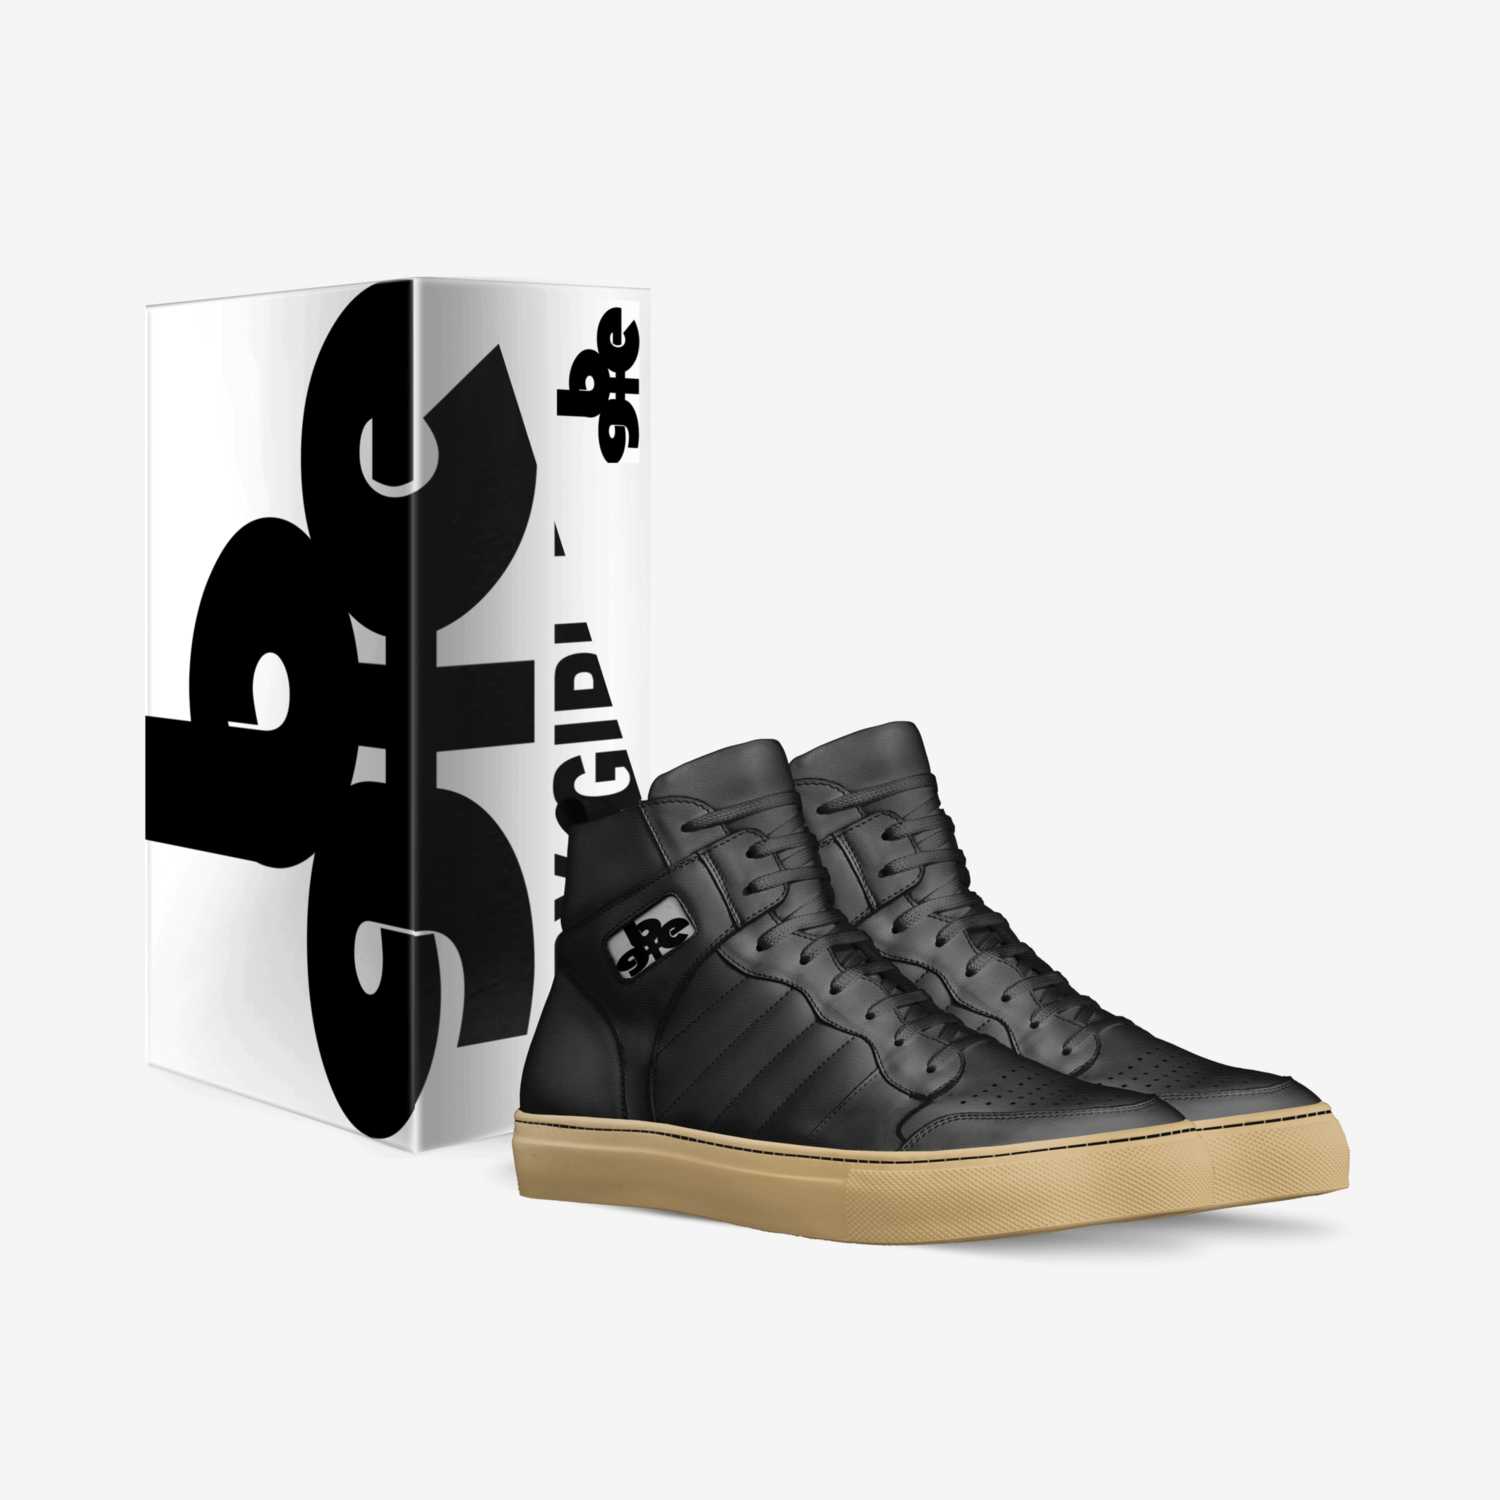 School X Sj1 Salto custom made in Italy shoes by Baby-girl Elite | Box view